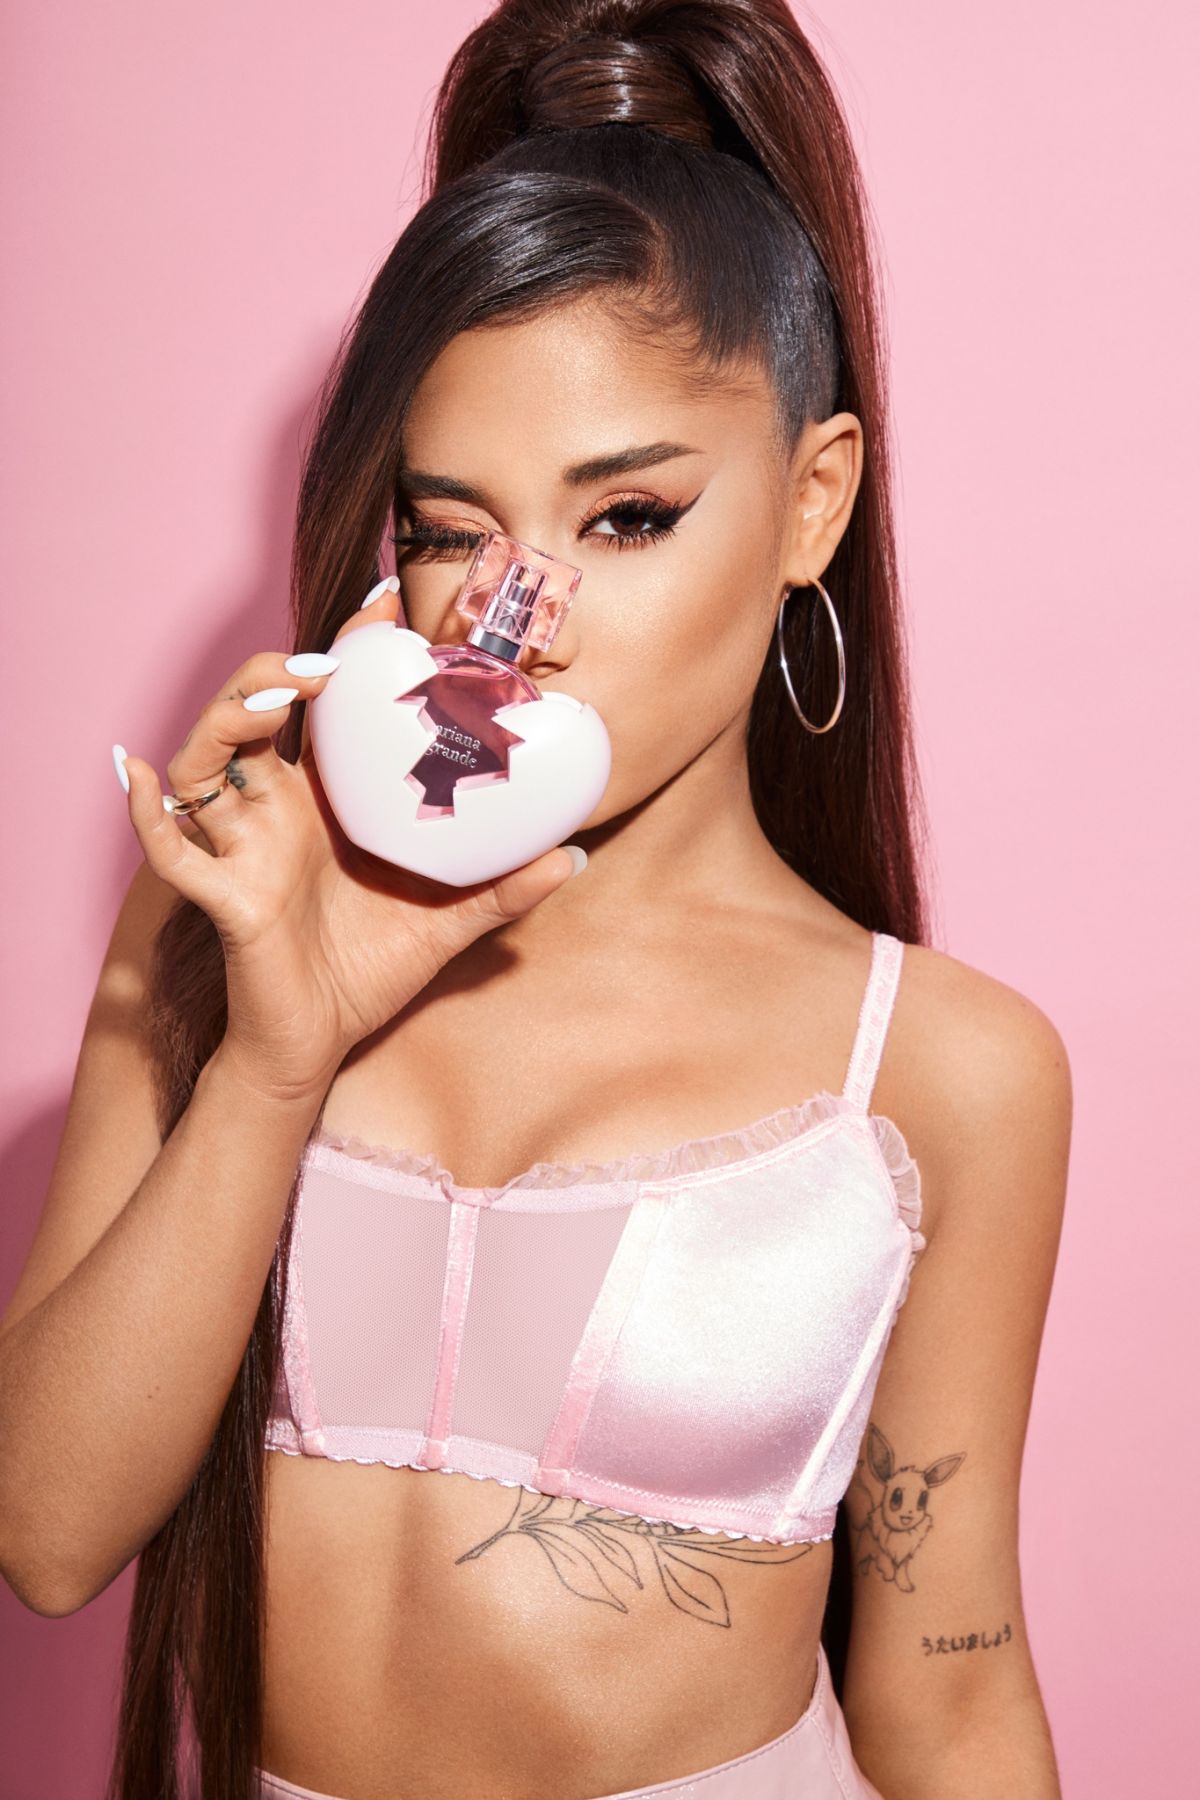 ARIANA GRANDE at a Photoshoot for Her Fragrance, 2019 HawtCelebs